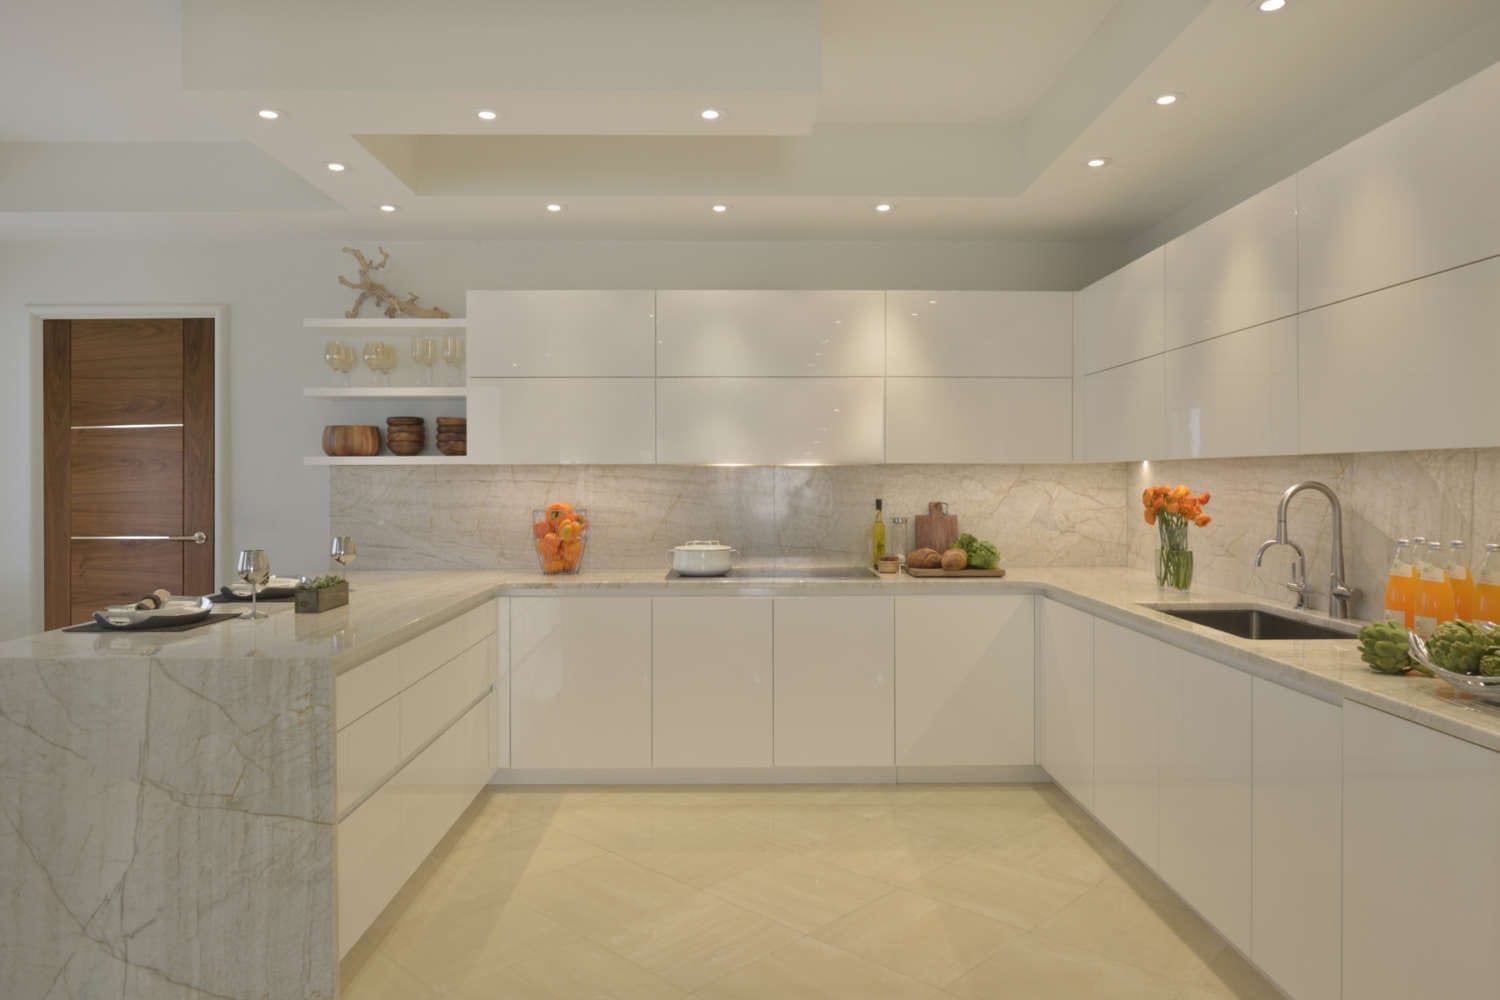 U-shaped kitchen features high gloss white, flat panel fully custom Artcraft cabinetry, light marble countertop and backsplash with veining, light porcelain tile flooring, open shelving and soft lighting. Design by Tabitha Tepe of Bilotta Kitchens.